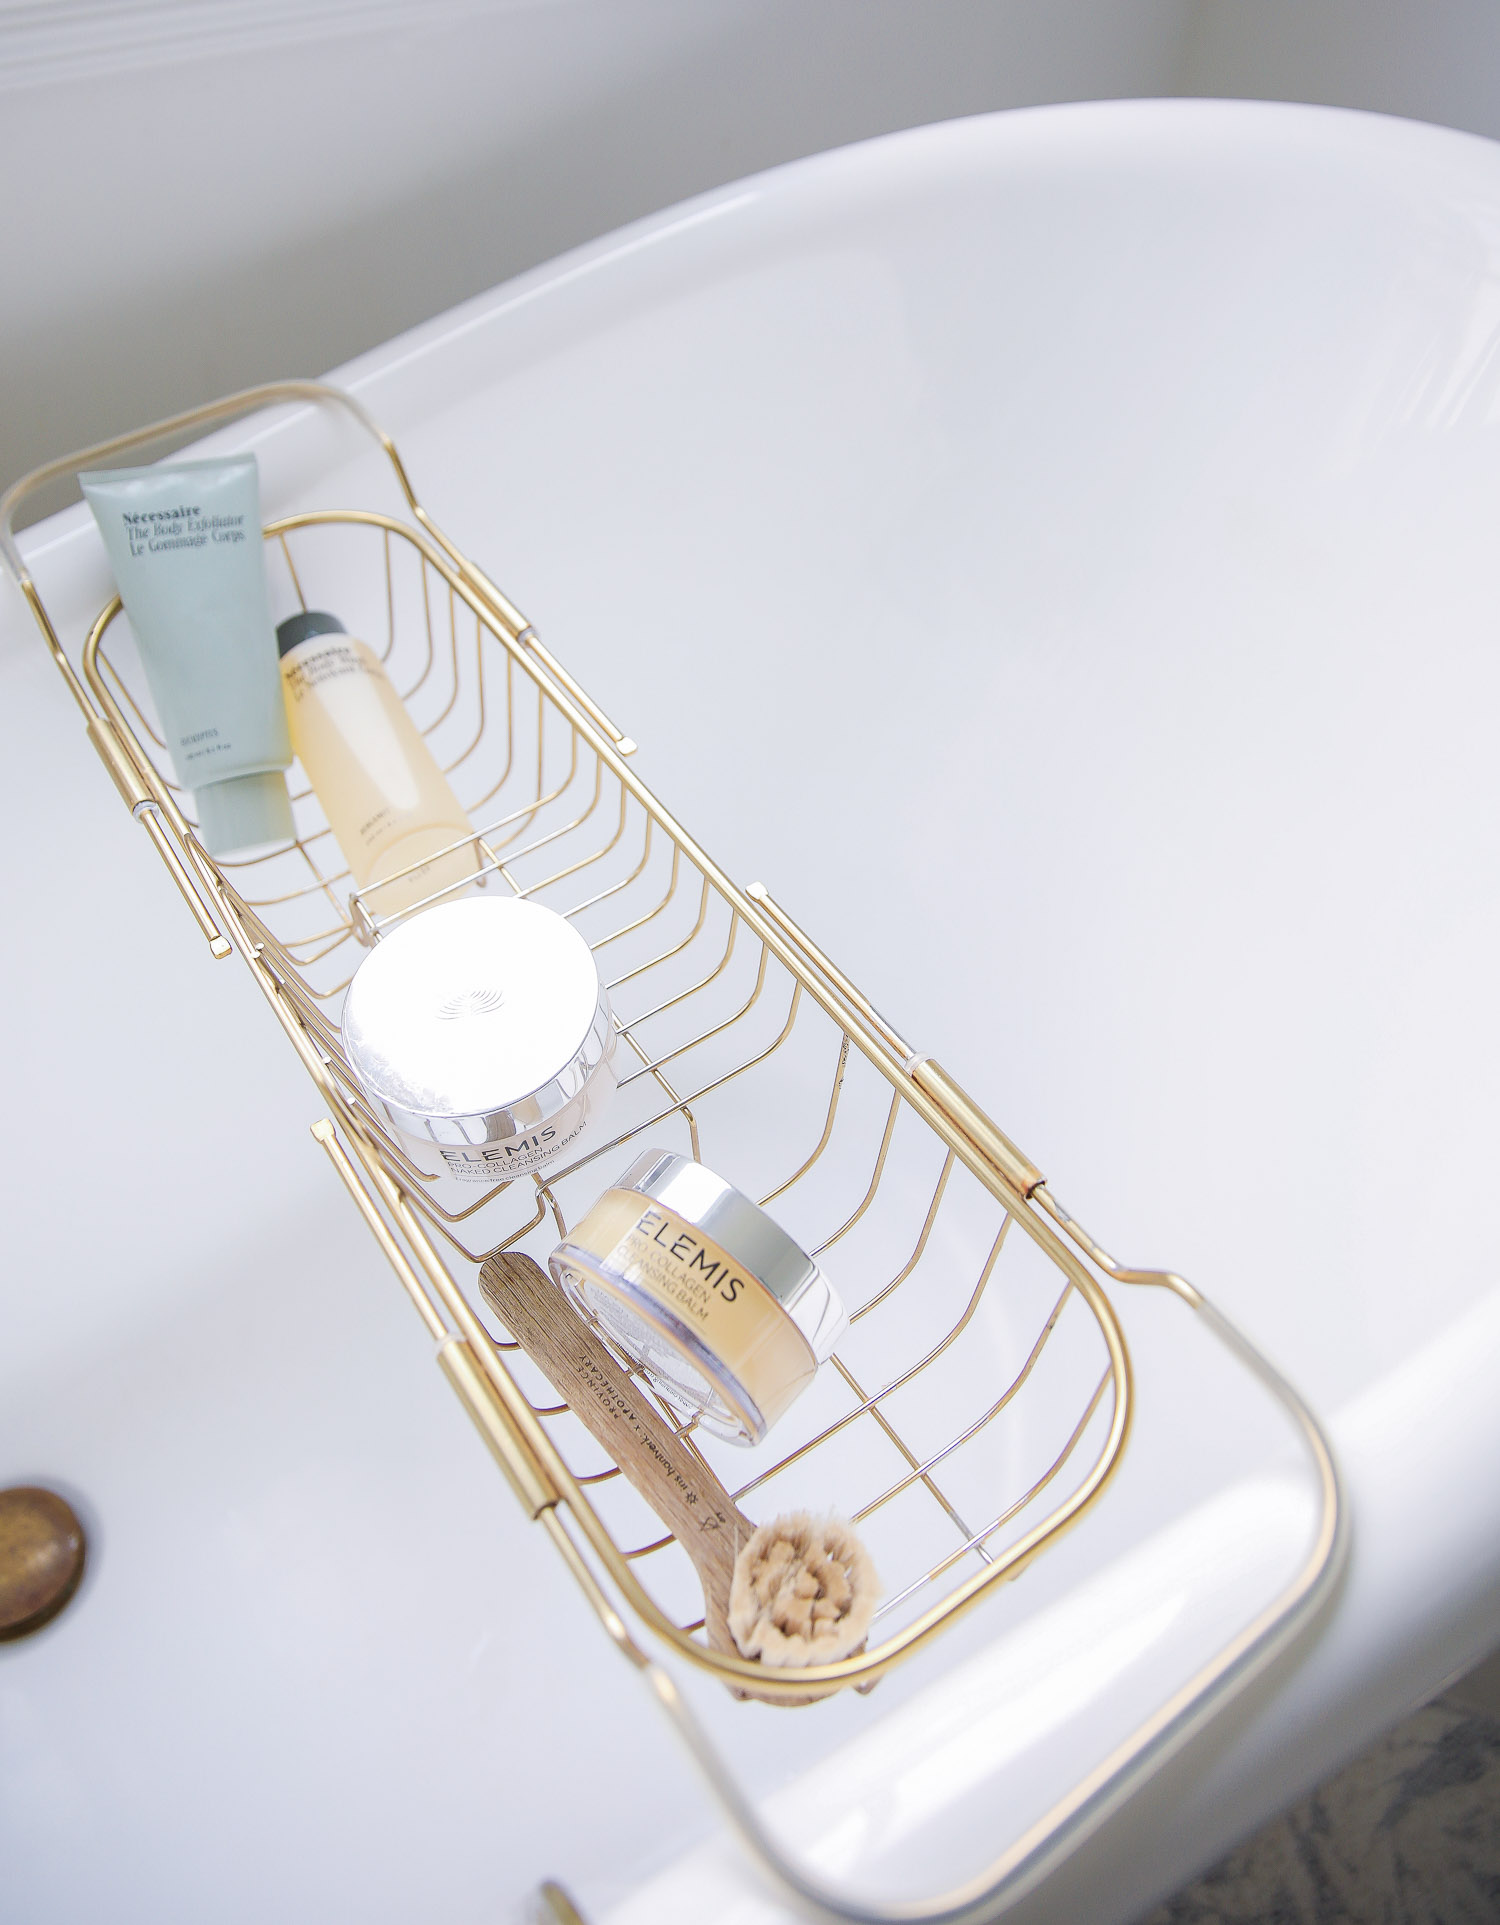 Elemis cleansing balm Nordstrom sale 2021, Emily gemma master bathroom, Nordstrom anniversary sale 2021 beauty must haves, anthropologie bathrom decor 2021, pinterest bathroom all white gold | Nordstrom Anniversary Sale 2021 by popular US life and style blog, The Sweetest Thing: image of a gold wire bathtub tray on a white clawfoot tub filled with Elemis skincare products and a wood handle scrub brush. 